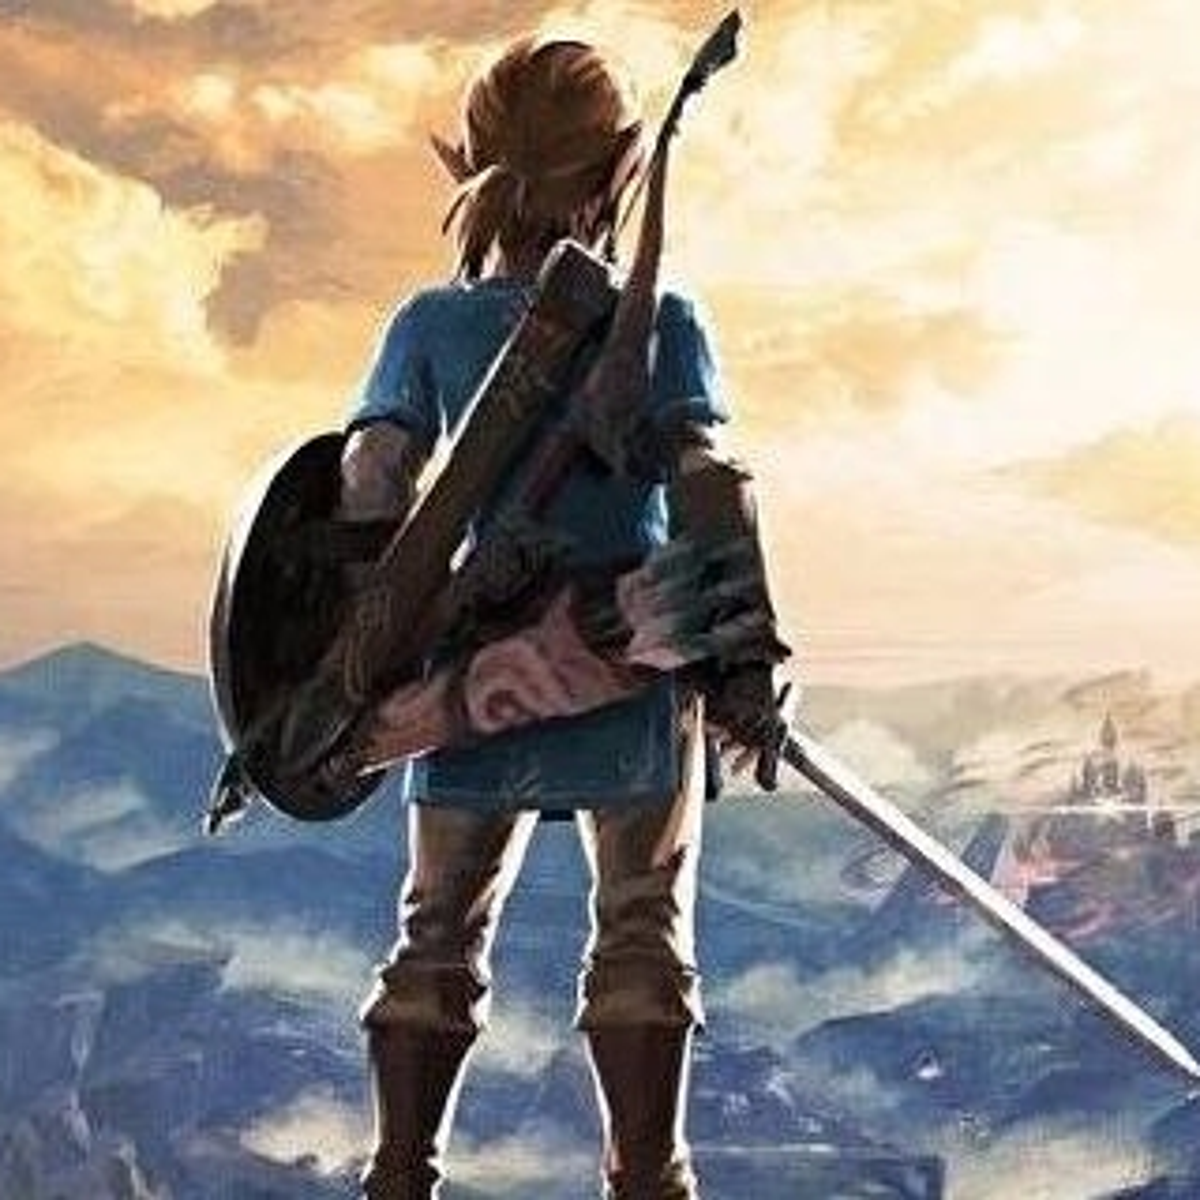 Zelda: Breath of the Wild walkthrough - Guide and tips for